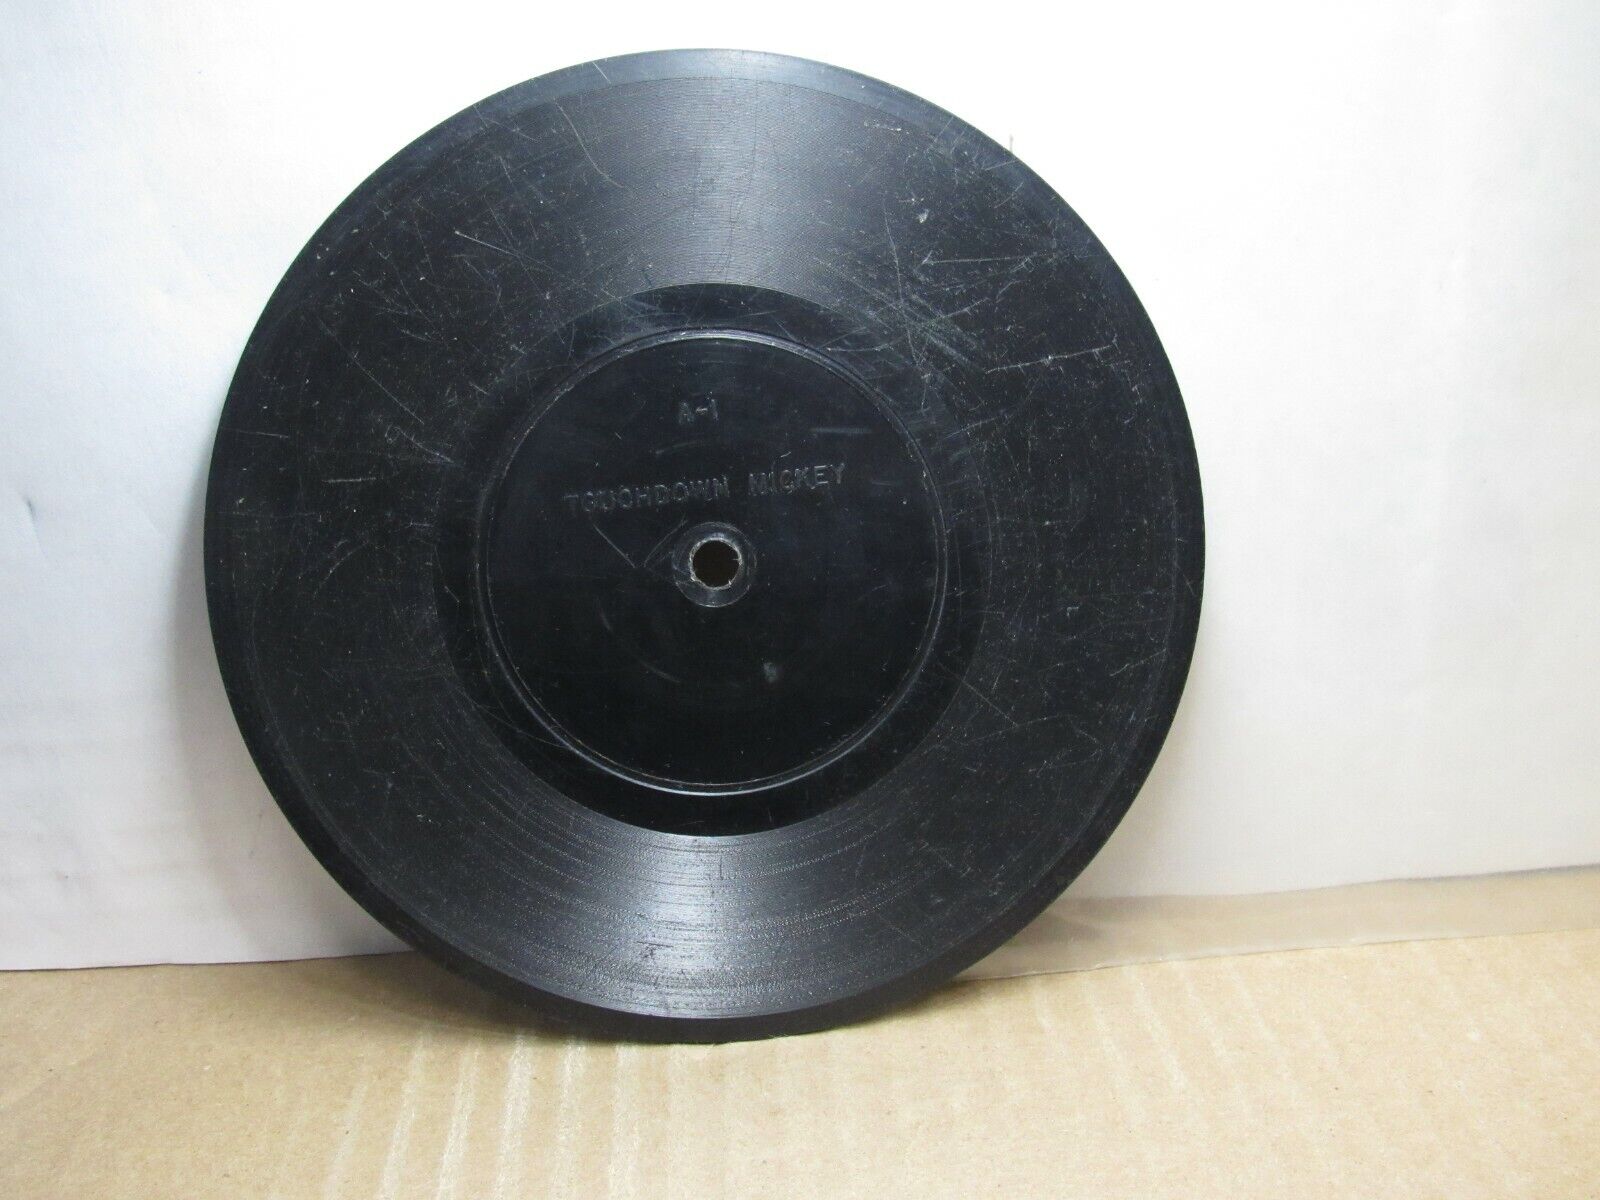 Disneyana - Old 78 Rpm Record - A-1 - Touchdown Mickey / A-2 - Dance Of Leopard